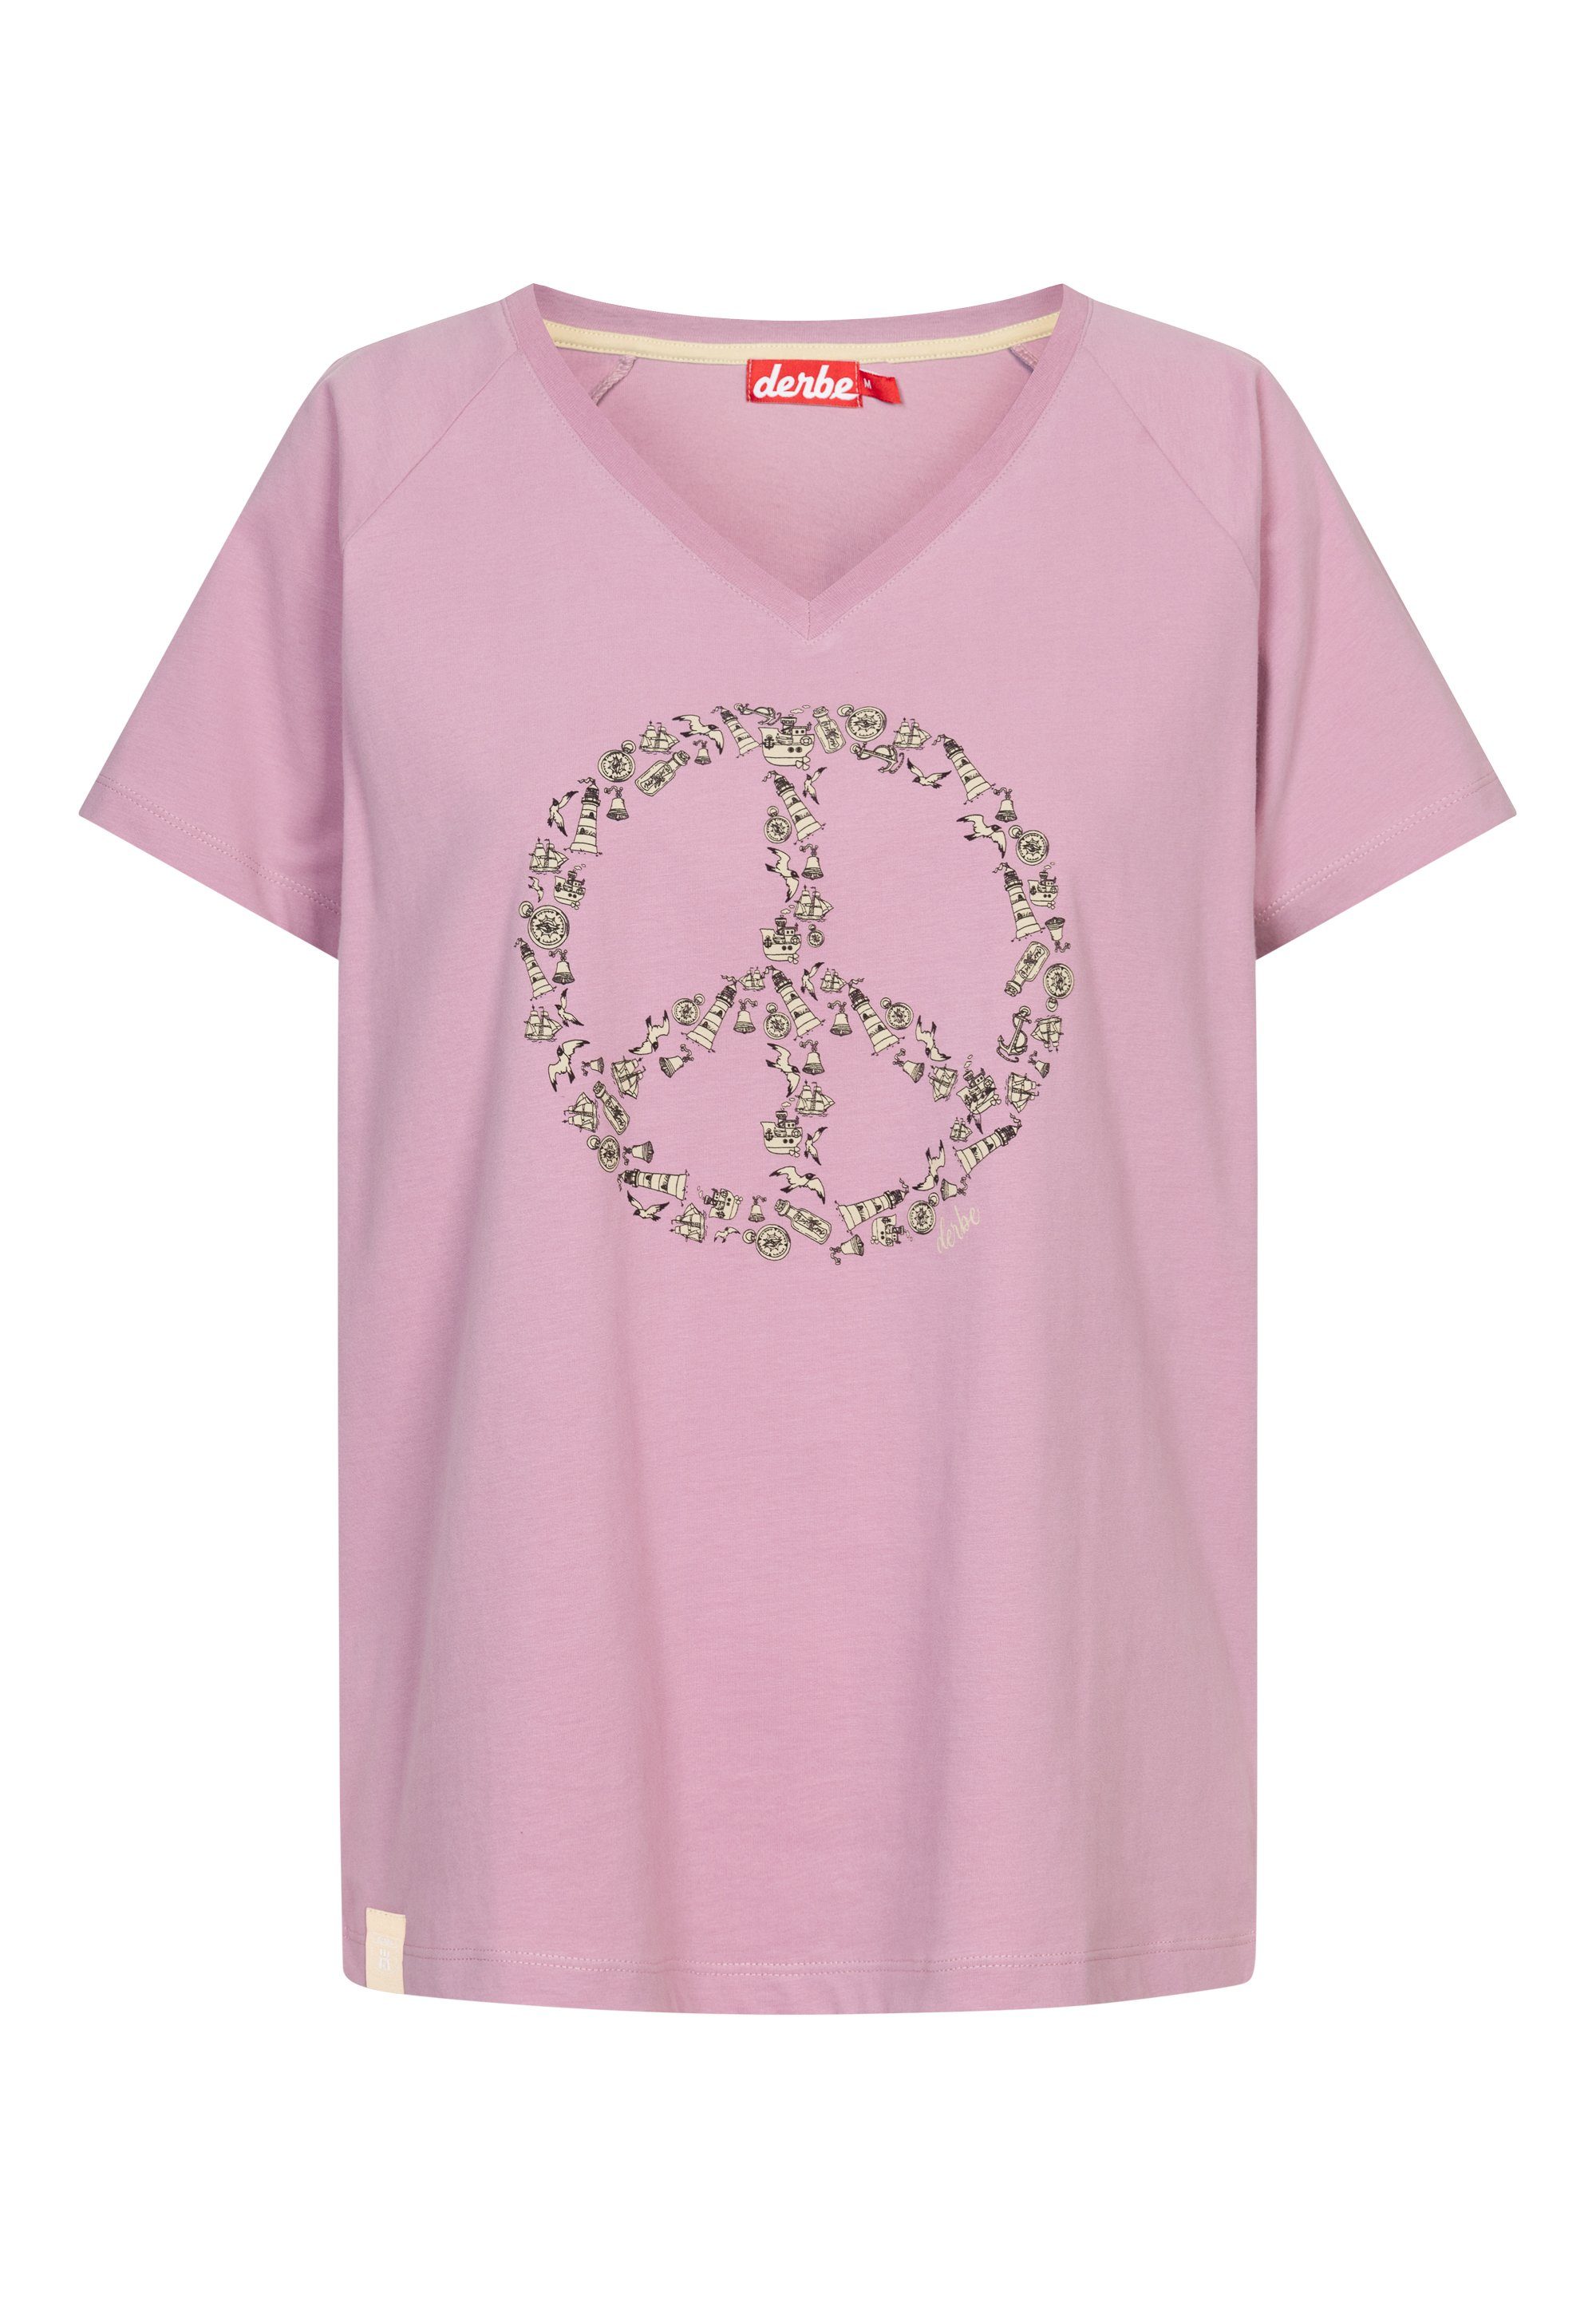 Derbe Print-Shirt PEACE forget-me-not